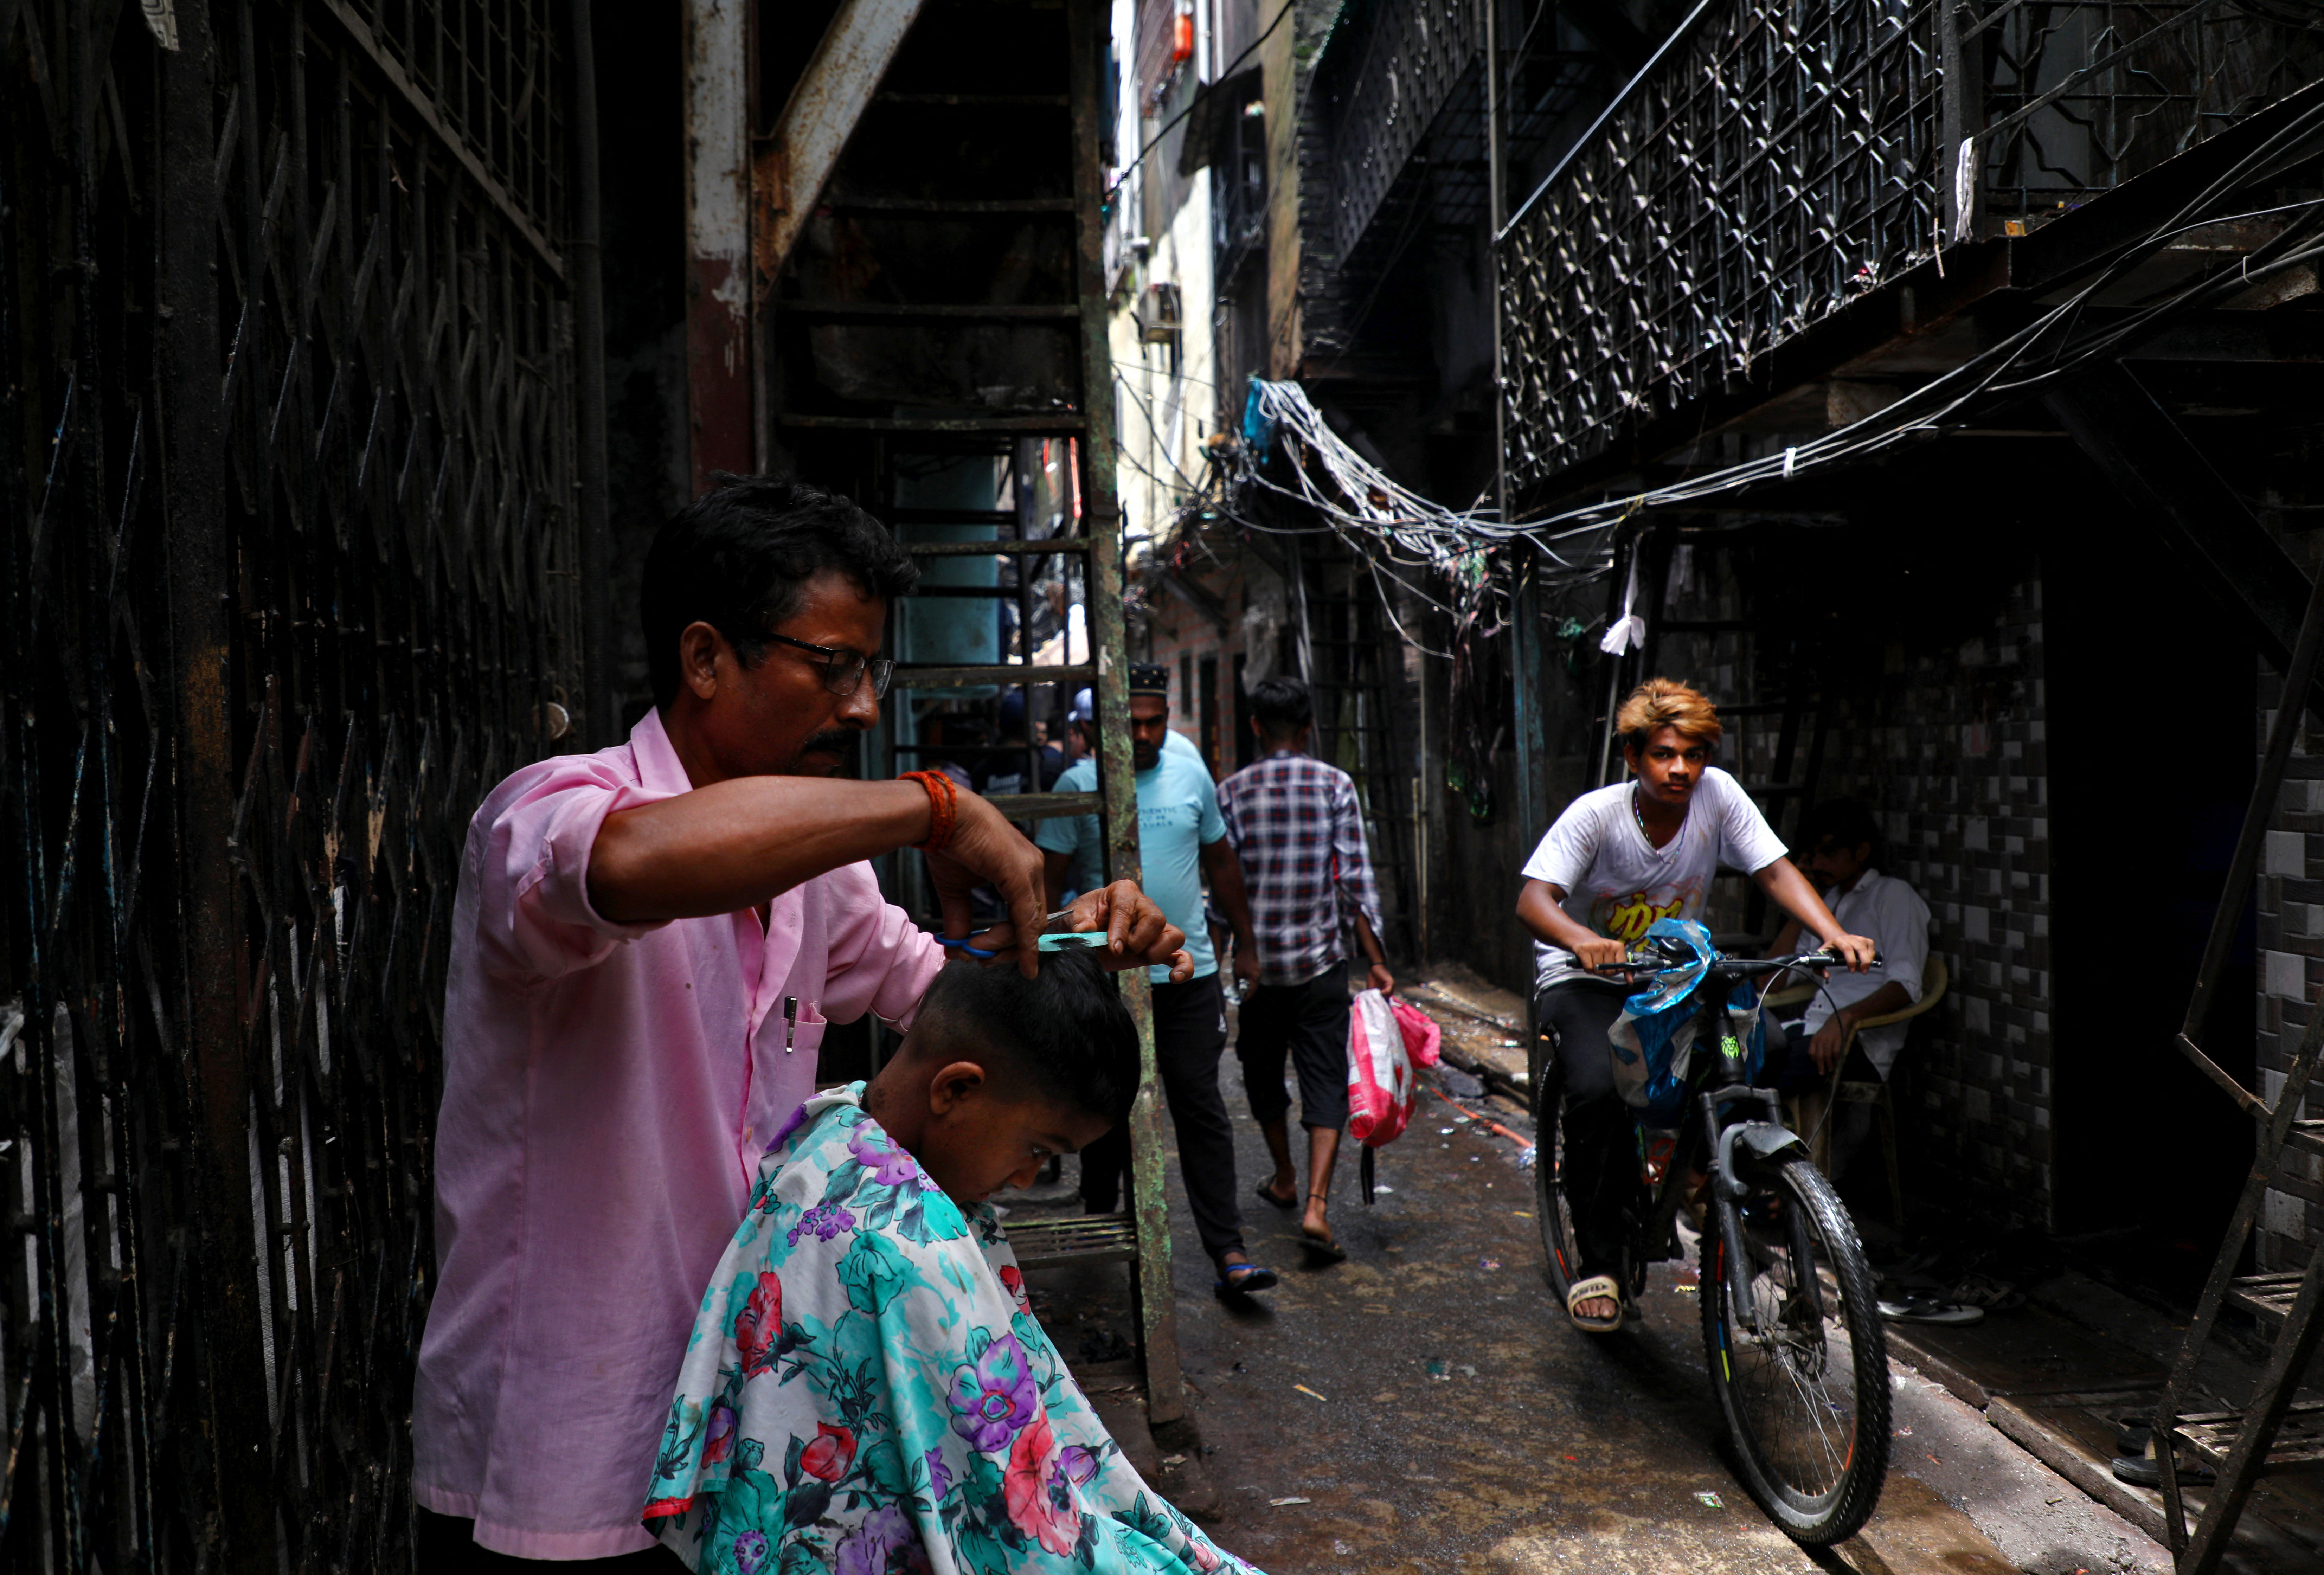 A boy gets a haircut from a barber in an alley in Dharavi, Mumbai